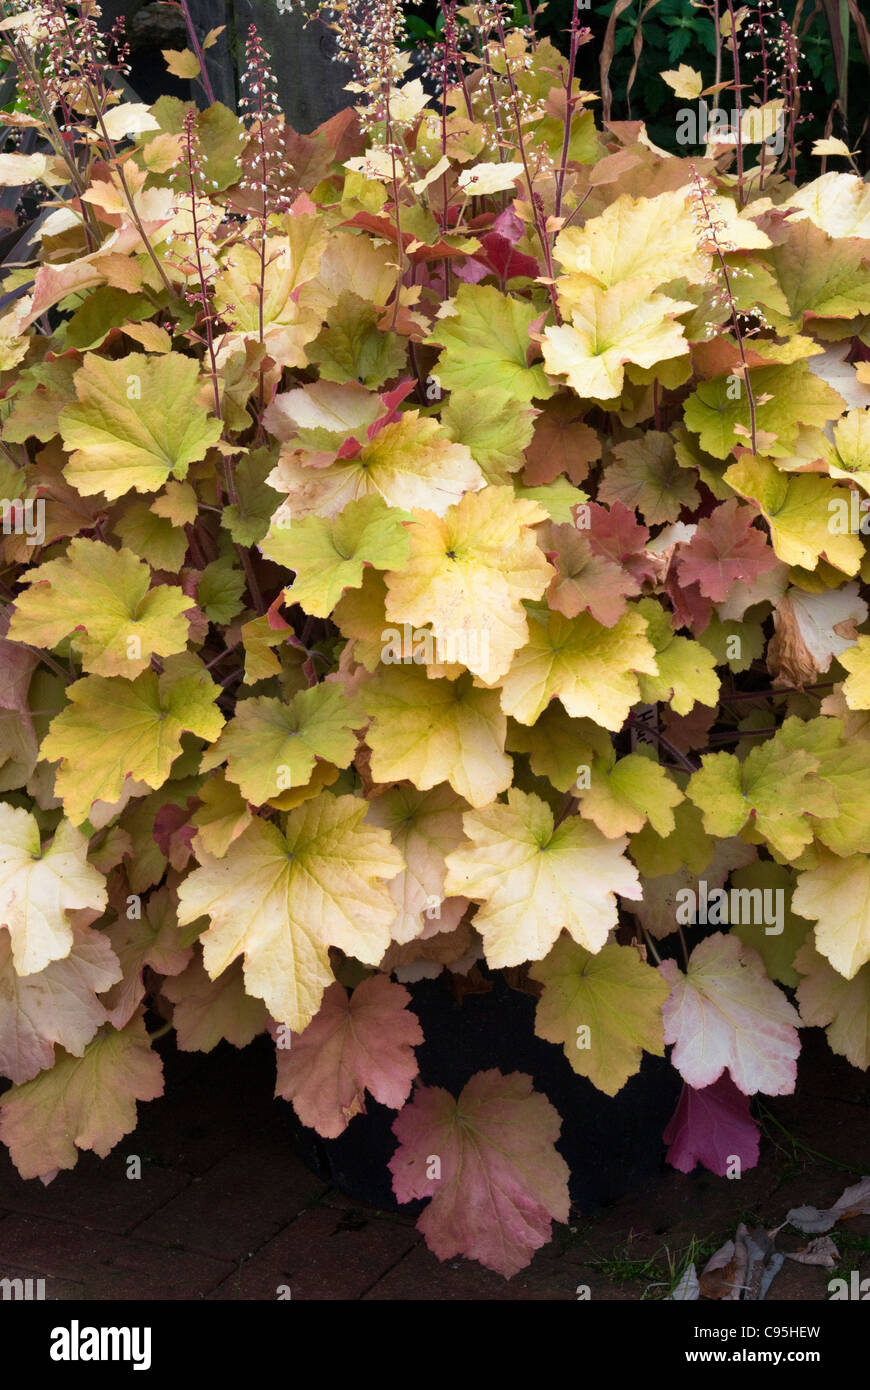 Heuchera ‘Caramel’ changeable foliage plant in flower leaf colors orange gold green pink red perennial garden entire plant shade Stock Photo